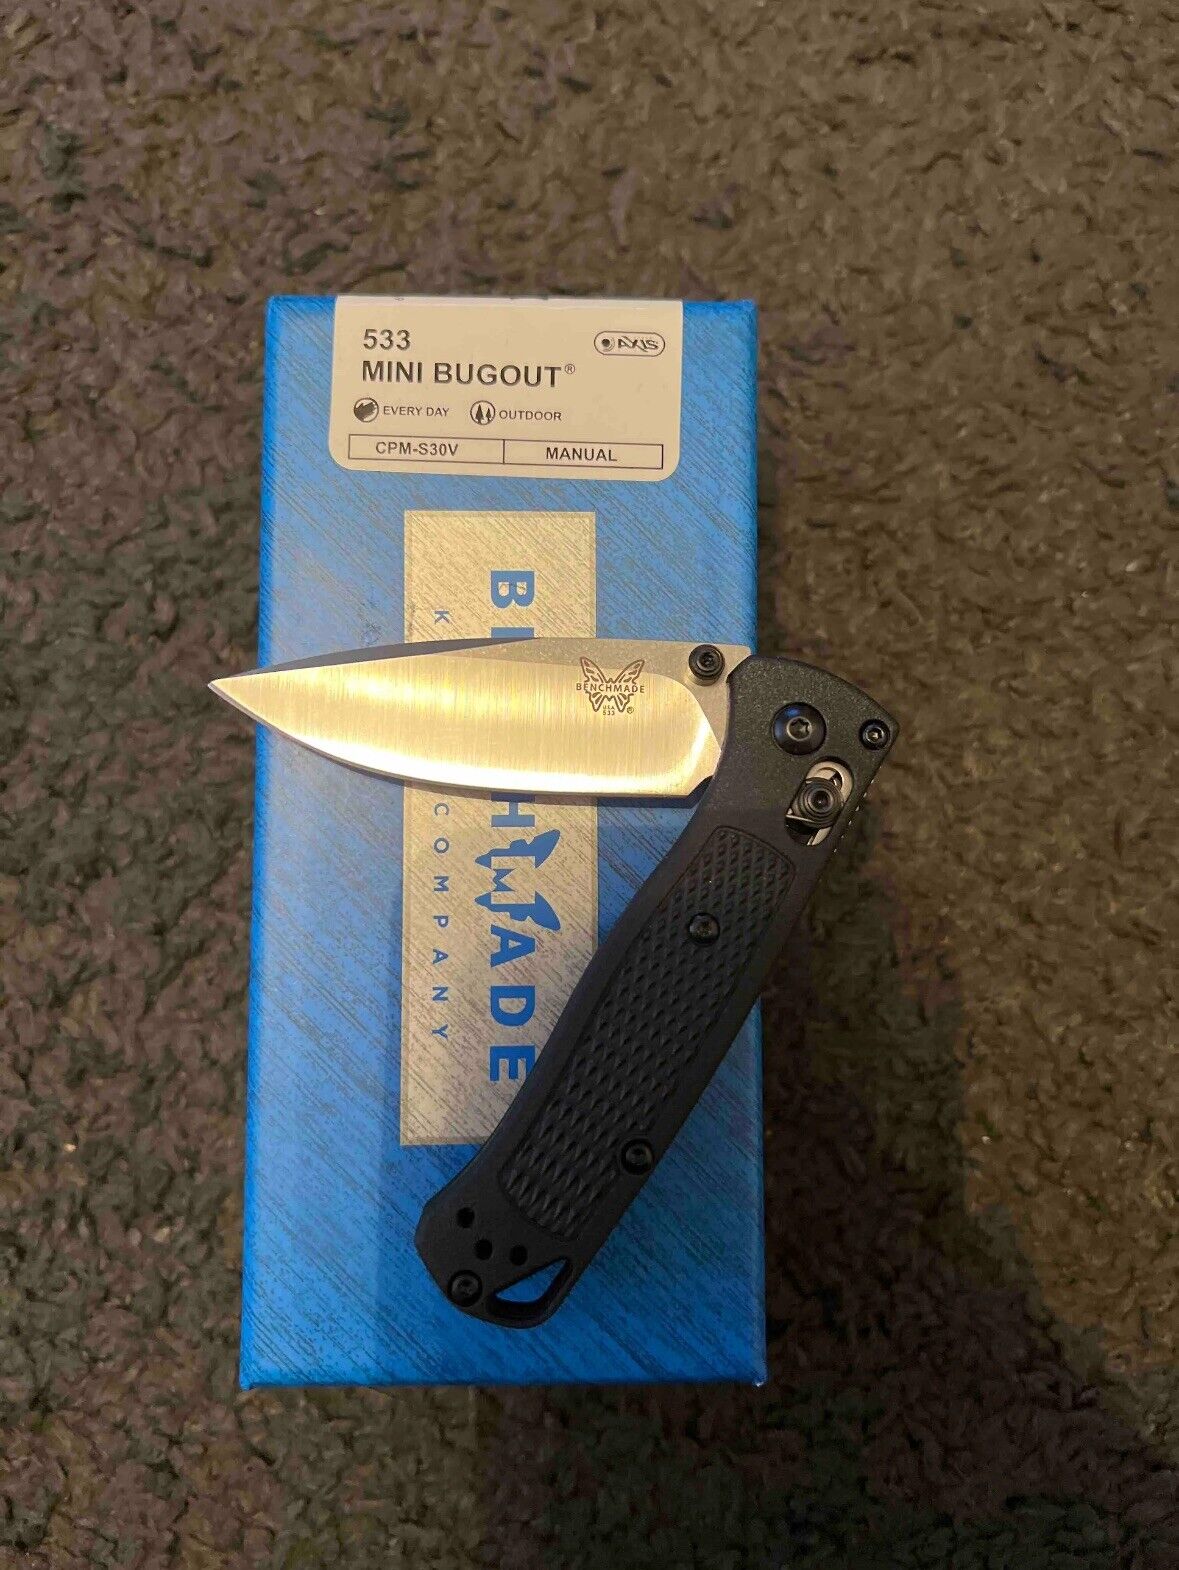 Replica Benchmade knife, ONLY REALISTIC REPLICA, NOT REAL.